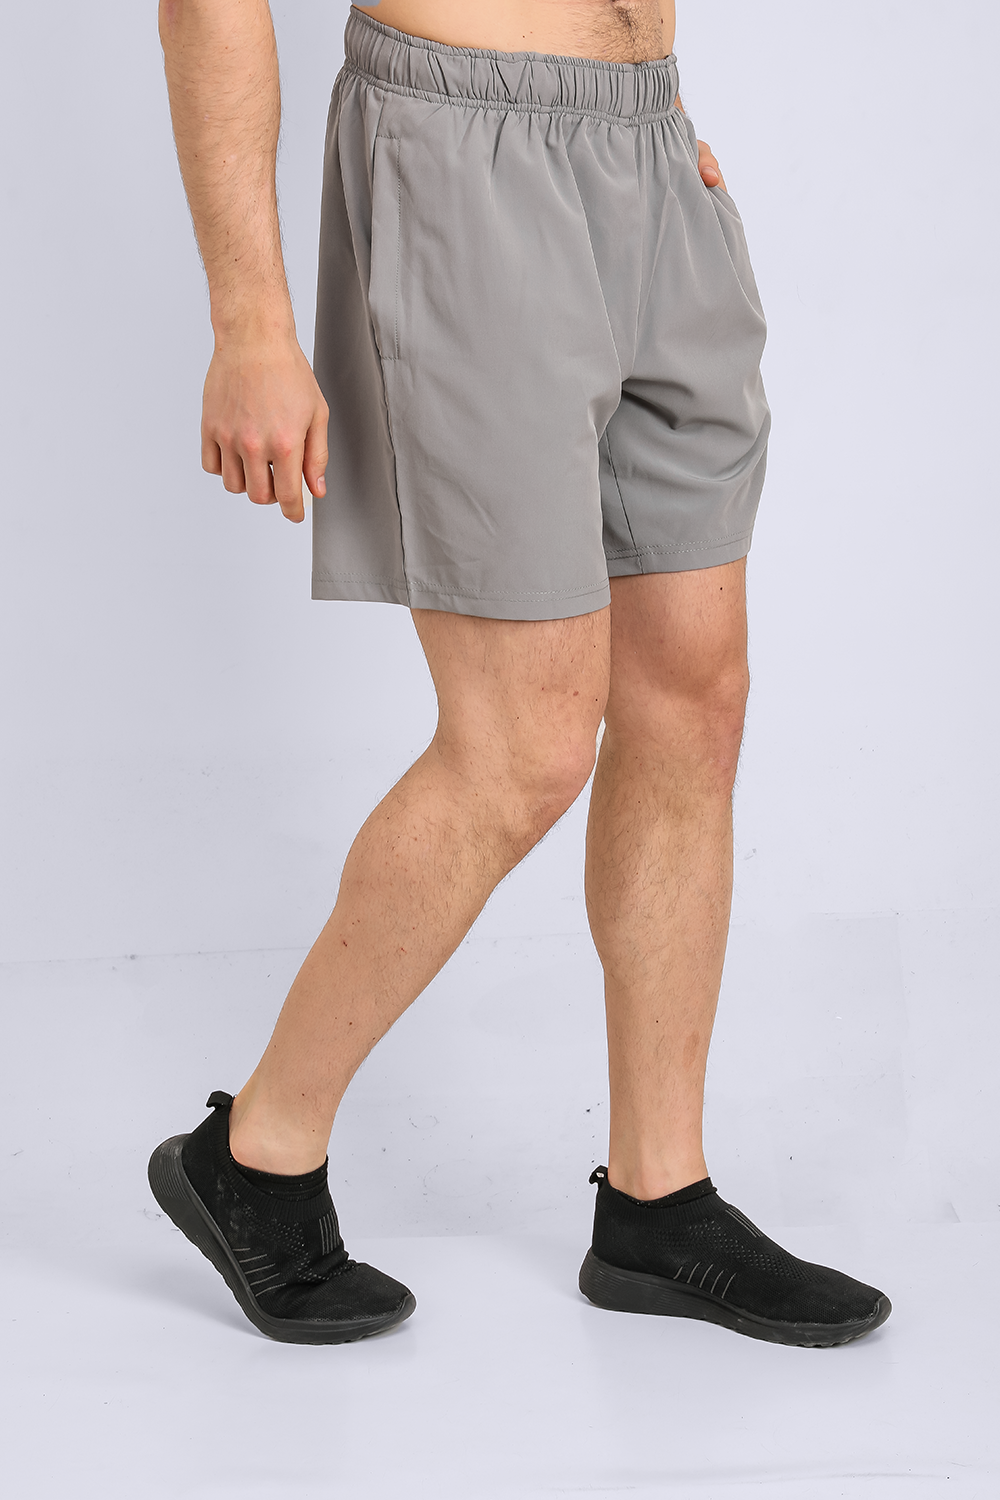 Dry-Fit Woven shorts- Grey